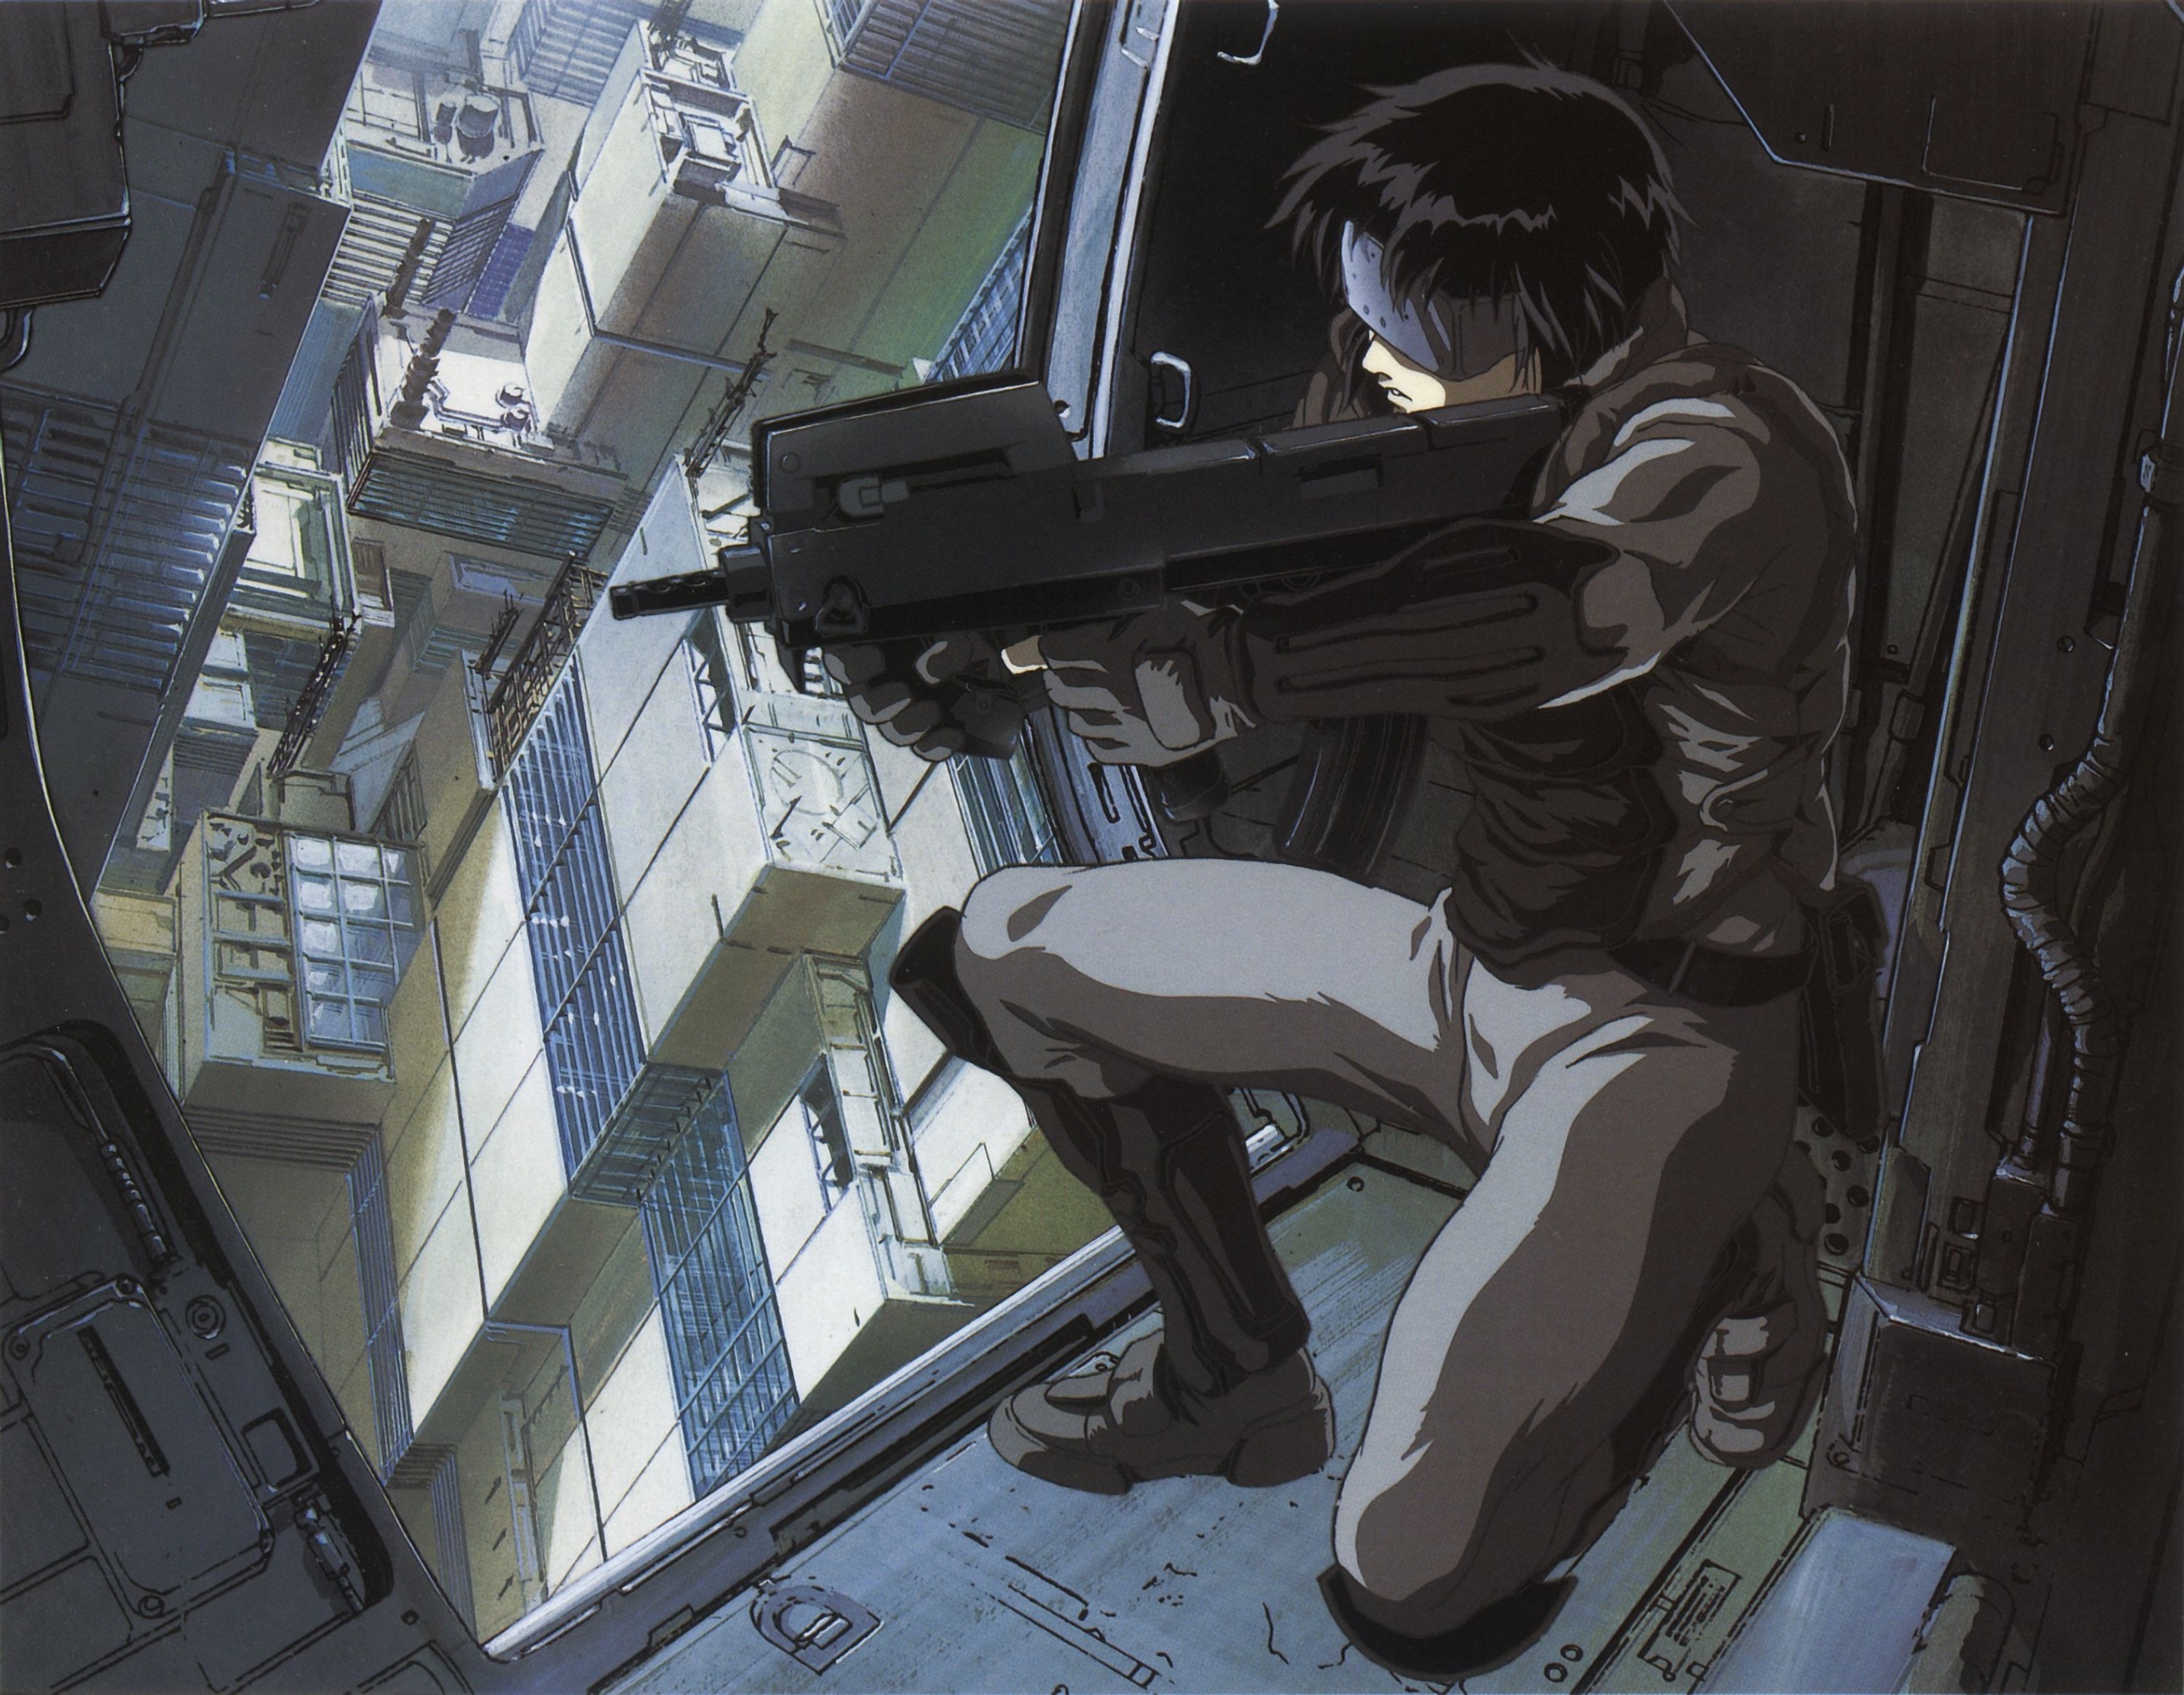 Anime 2861x2221 cyberpunk futuristic Ghost in the Shell anime weapon